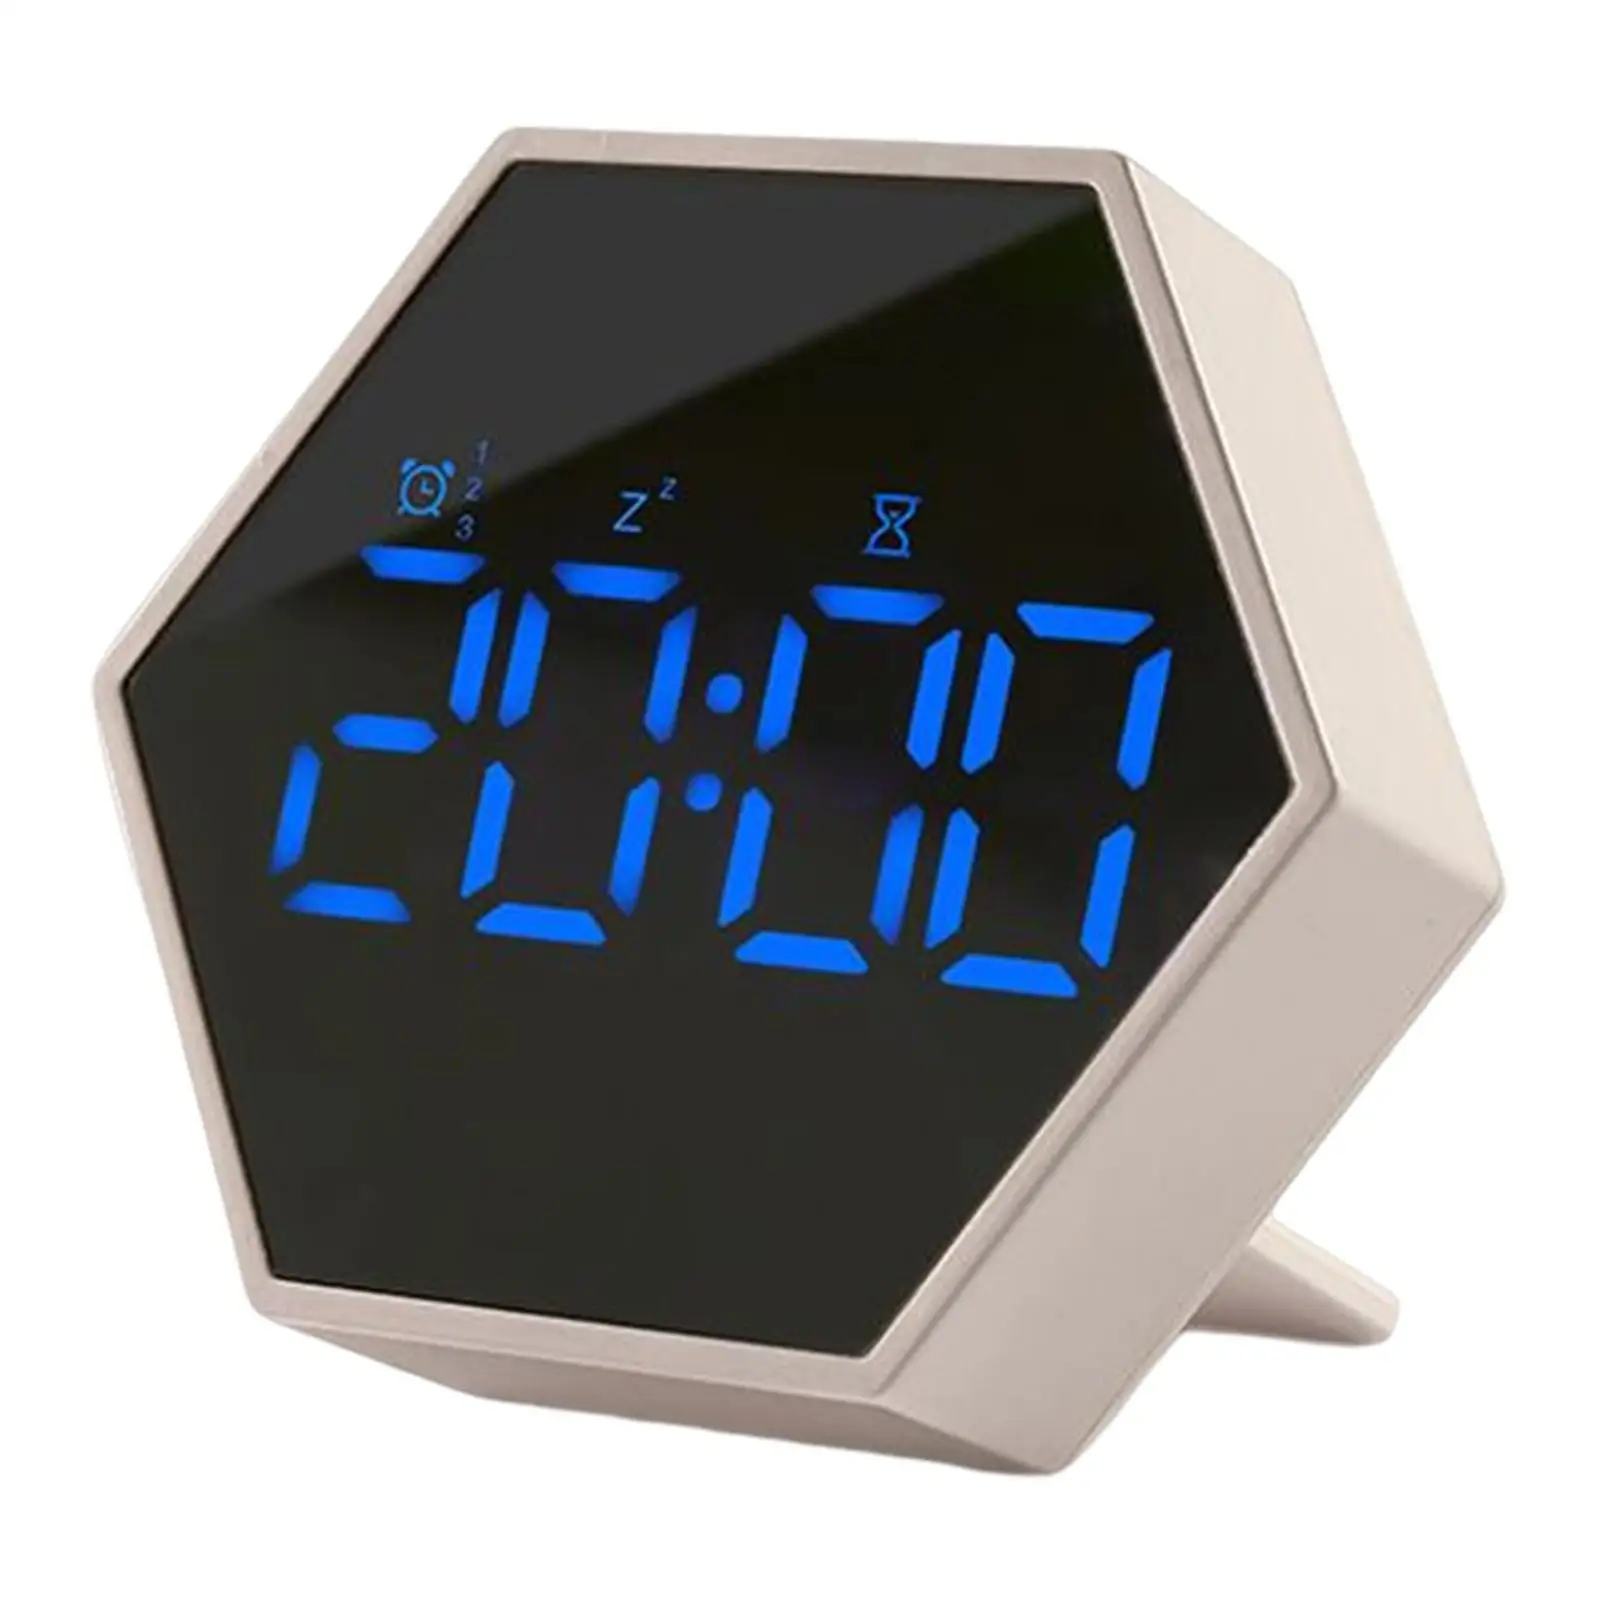 Alarm Clock LED Display Wall Clock Snooze Function Battery Powered Adjustable USB for Living Room Home Bedside Office Kitchen